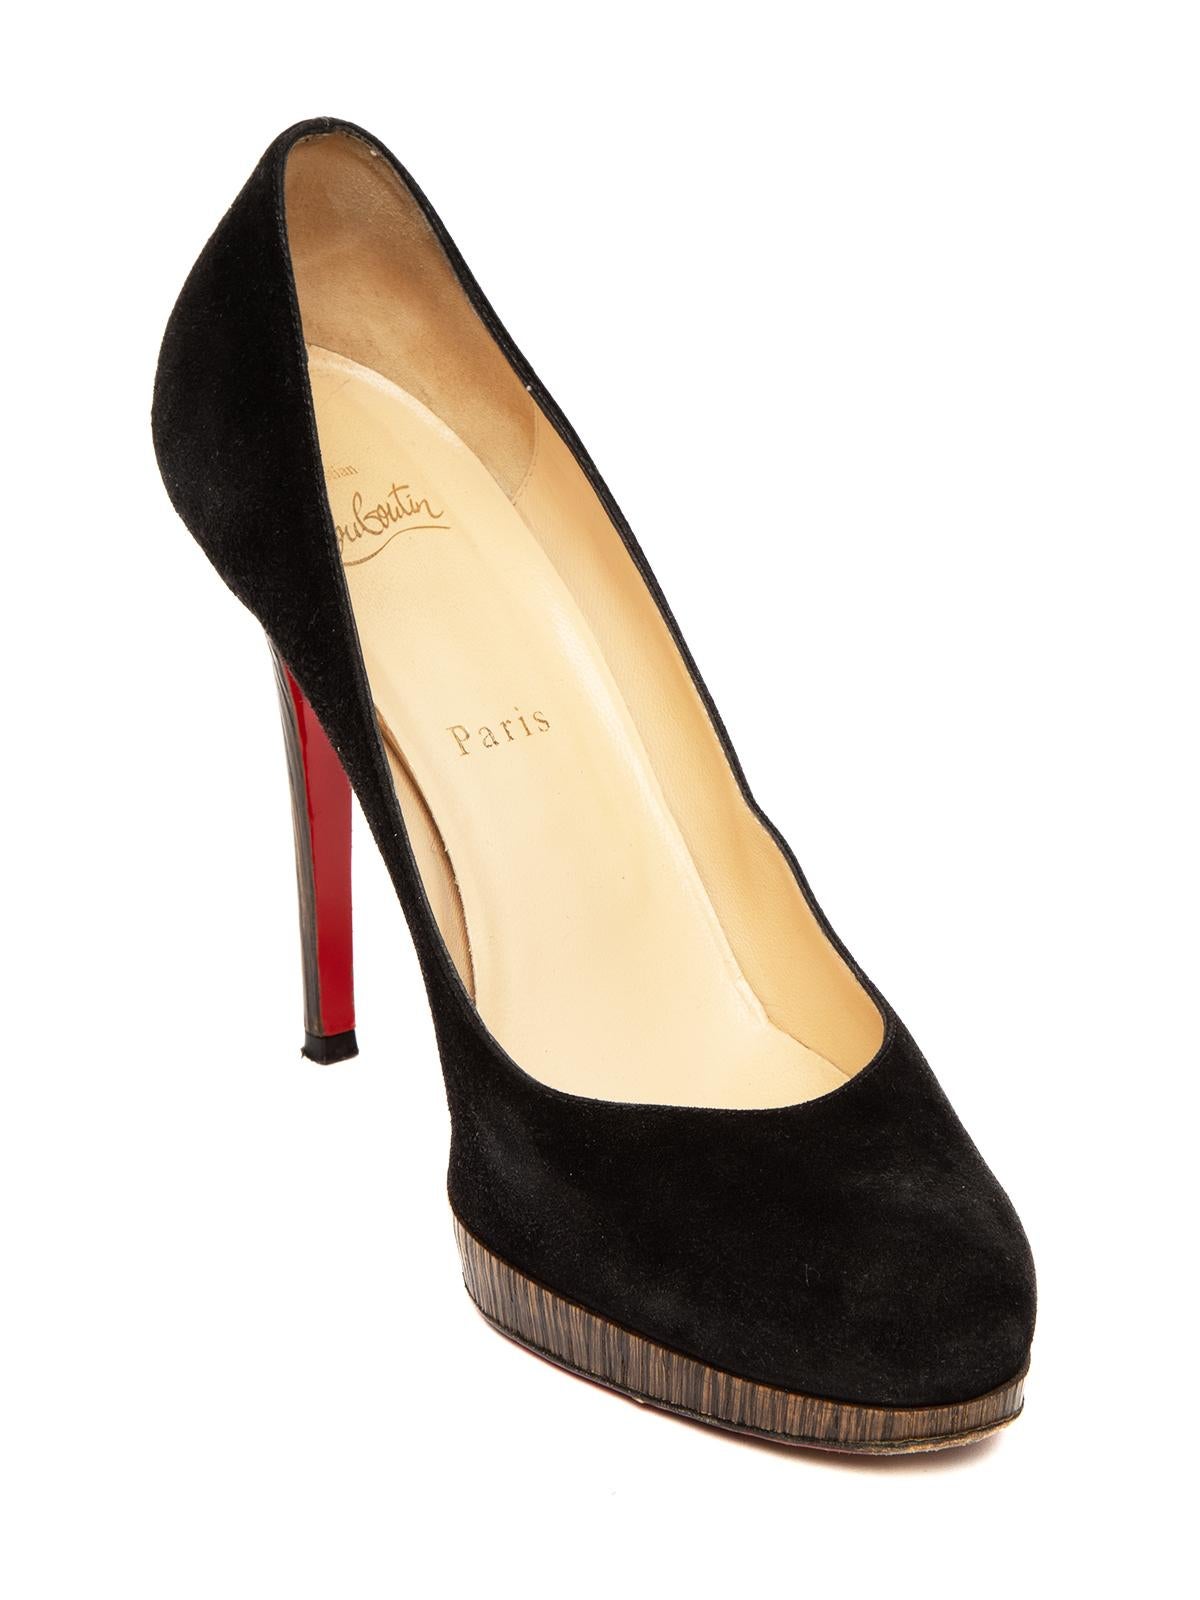 Editor’s Note Stand tall in this pair of Christian Louboutin consignment platform used designer heels. This sought after used Christian Louboutin style is set to be a welcomed new arrival in your luxury consignment collection of used Louboutin